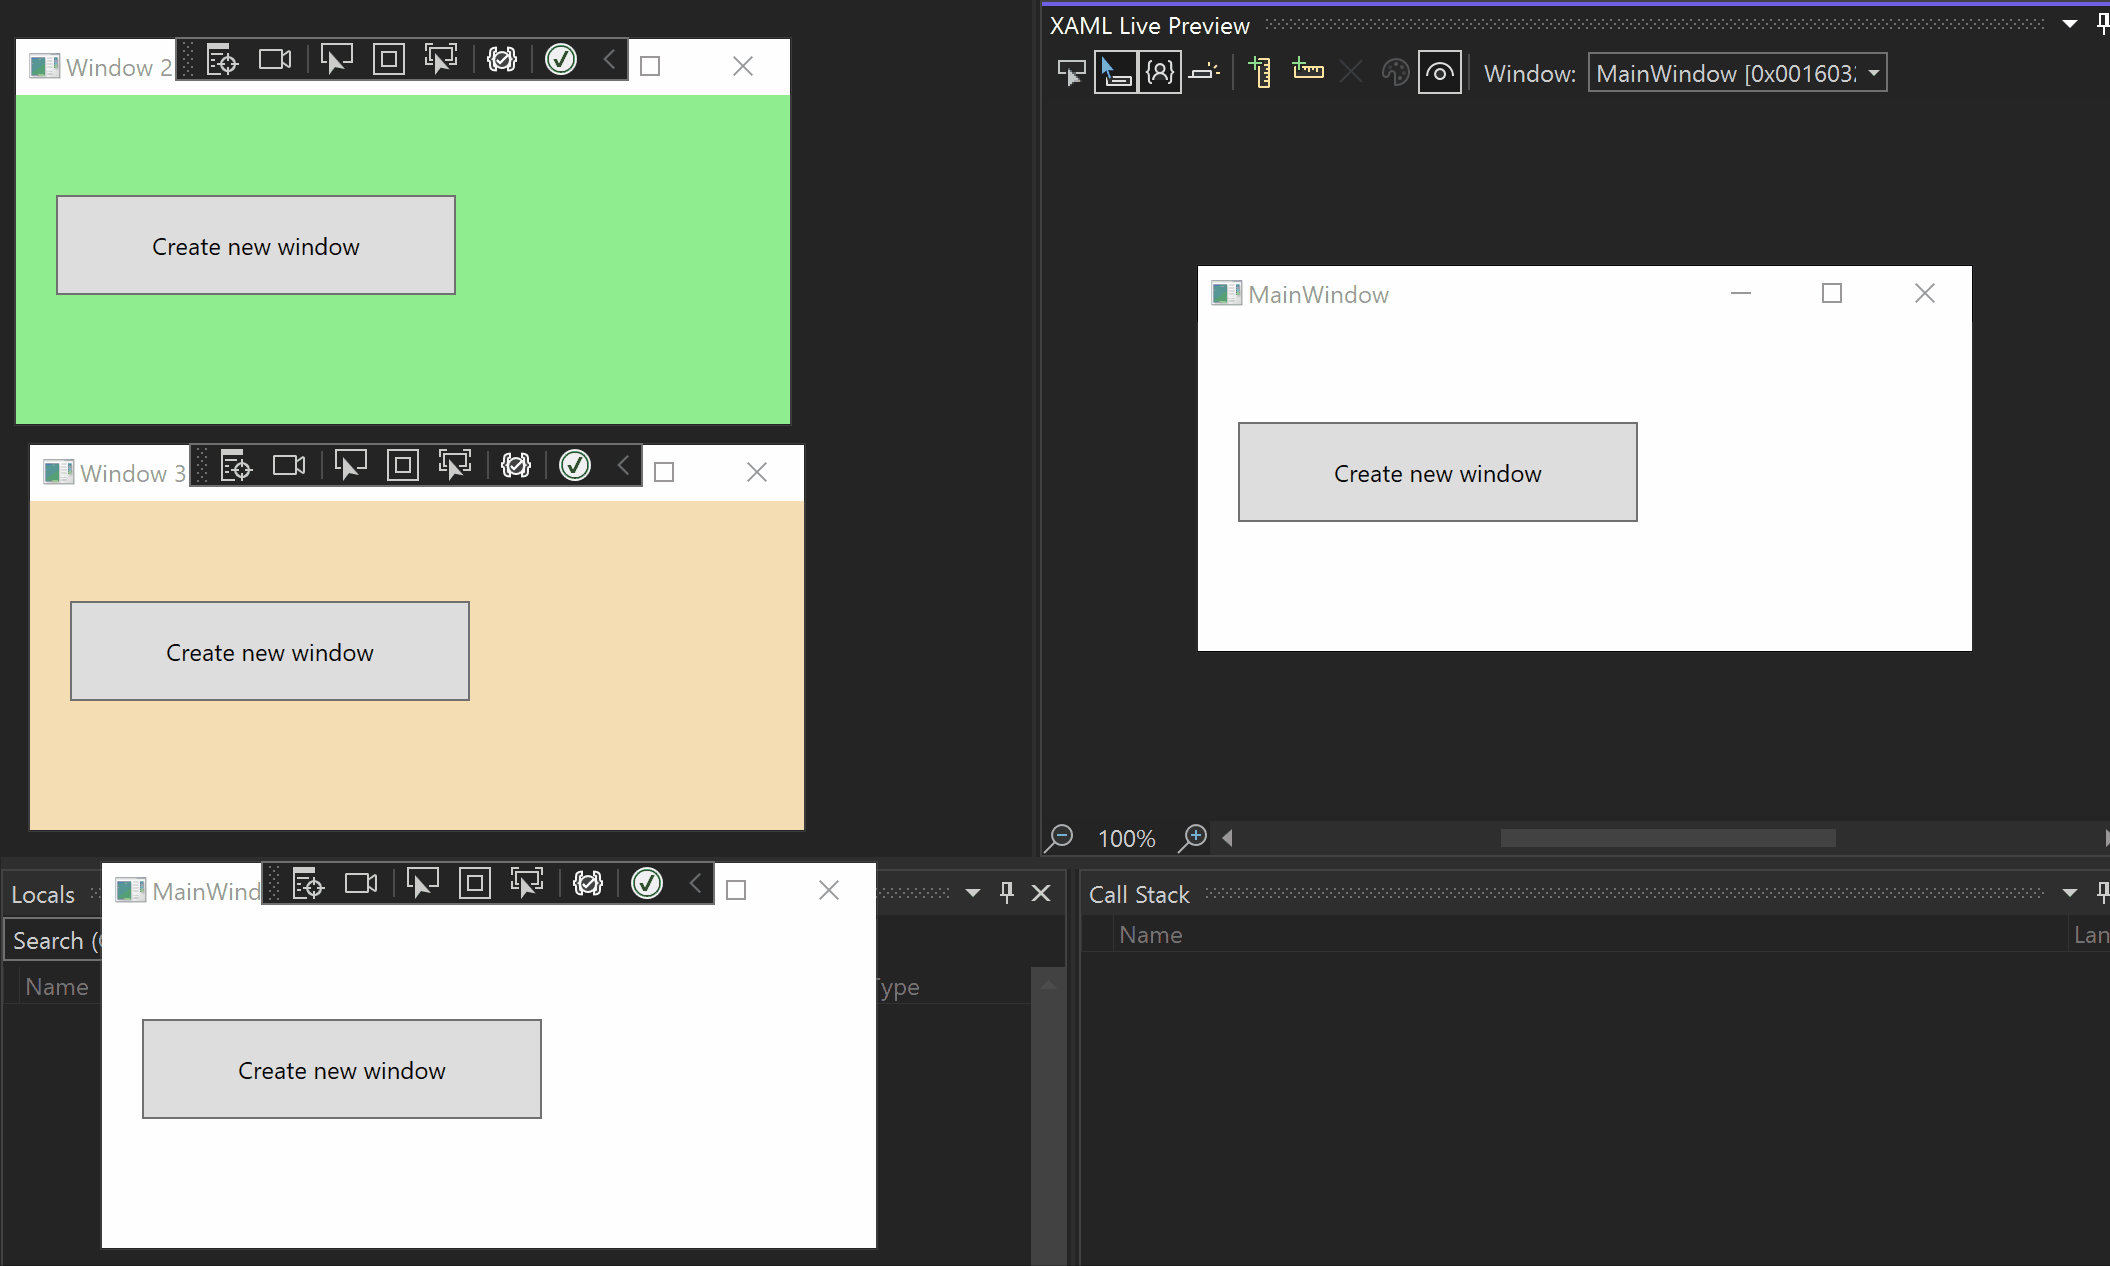 An animation of the multi-window application feature in XAML Live Preview.